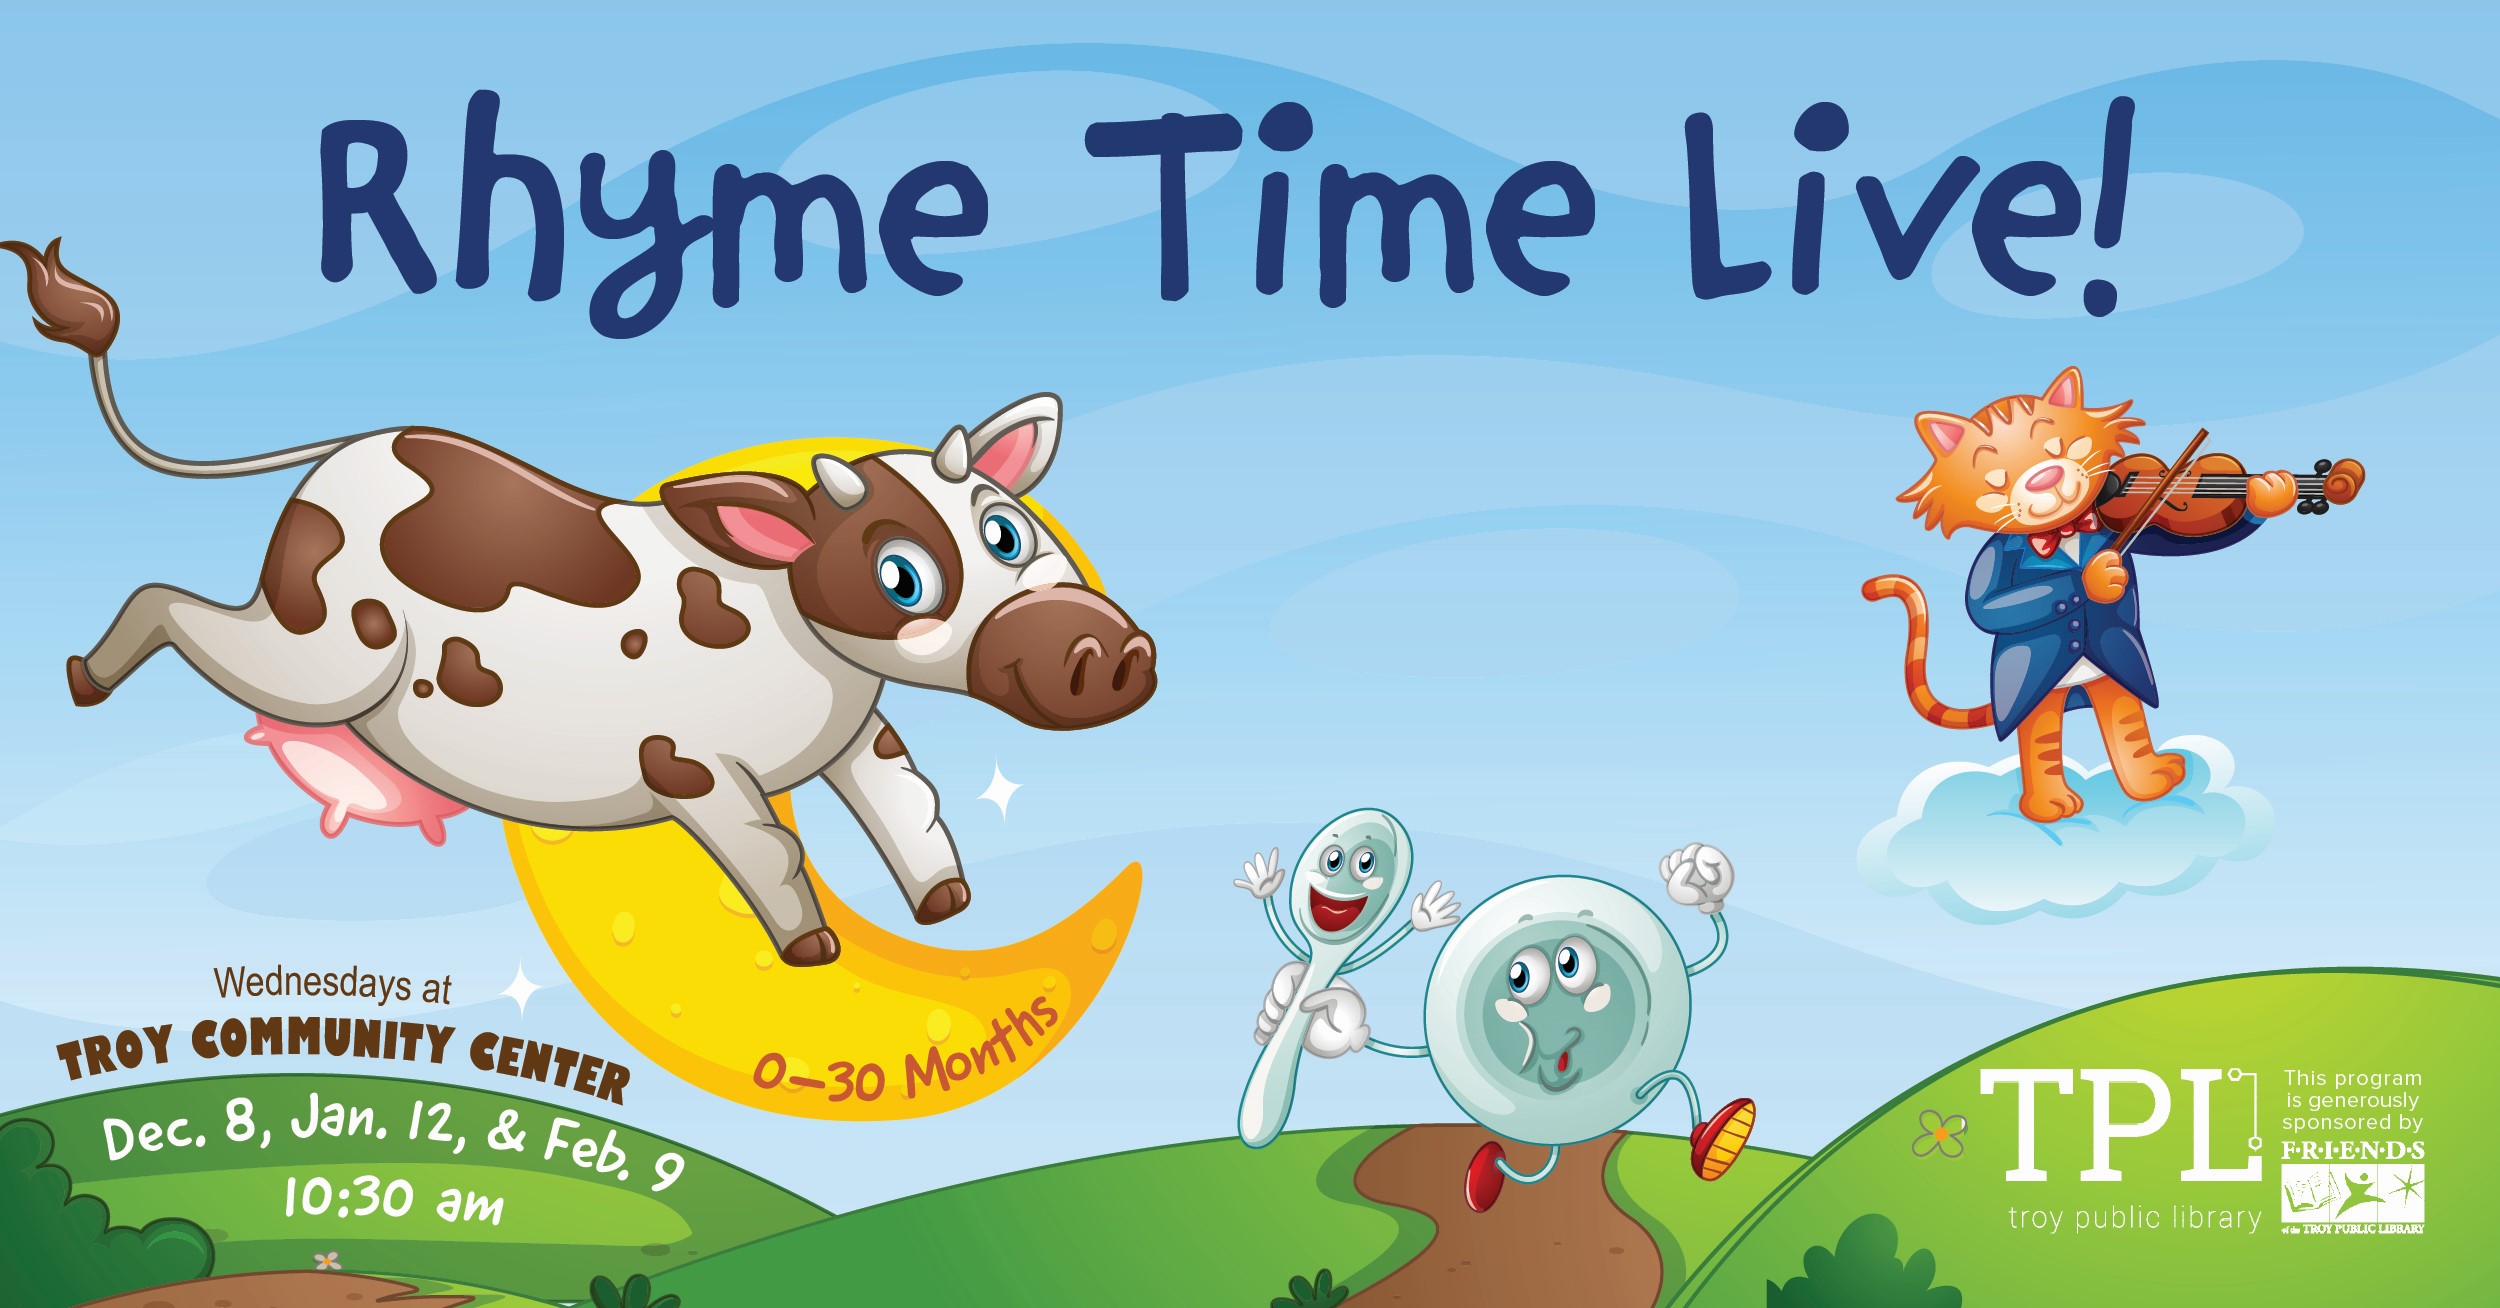 Rhyme Time Live! Wednesday, December 8 at 10:30am at the Troy Community Center. 0-30 Months. Sponsored by the Friends of the Troy Public Library